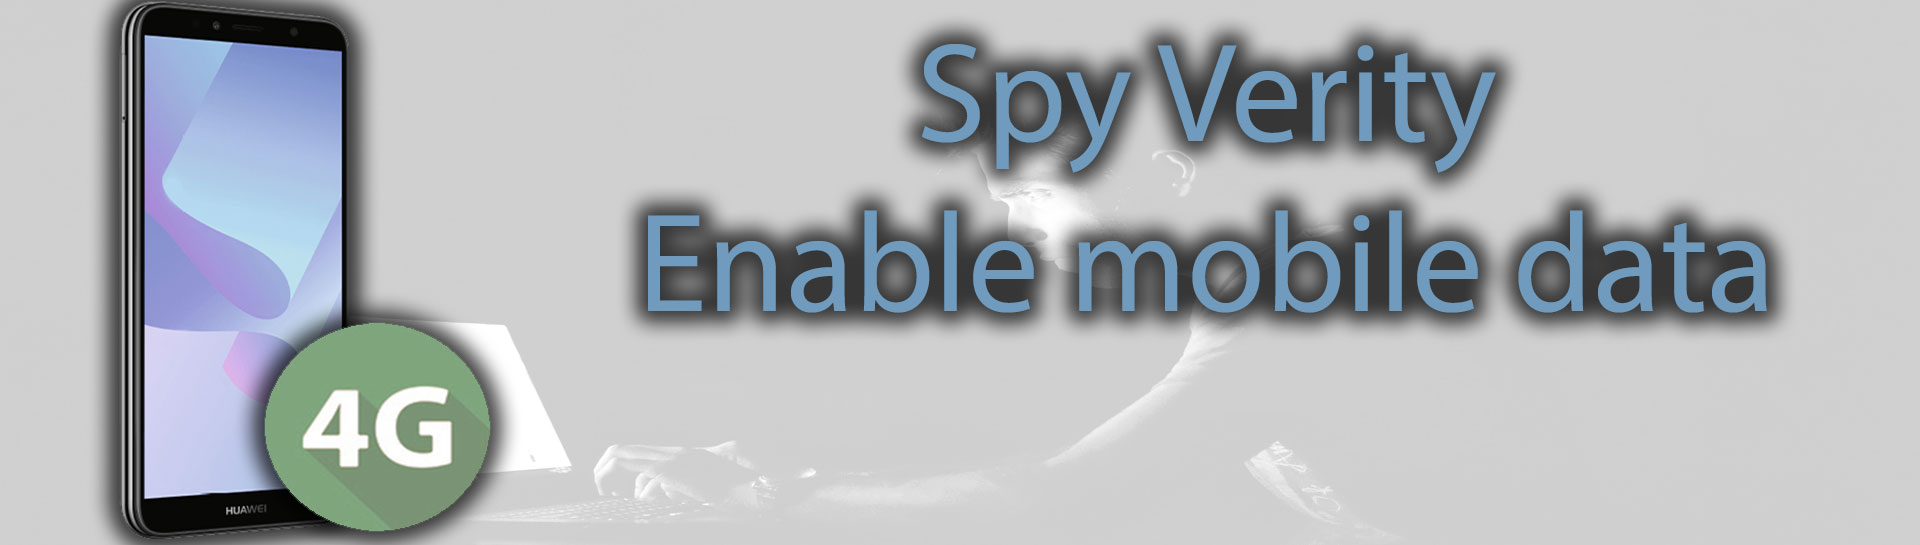 spy connection